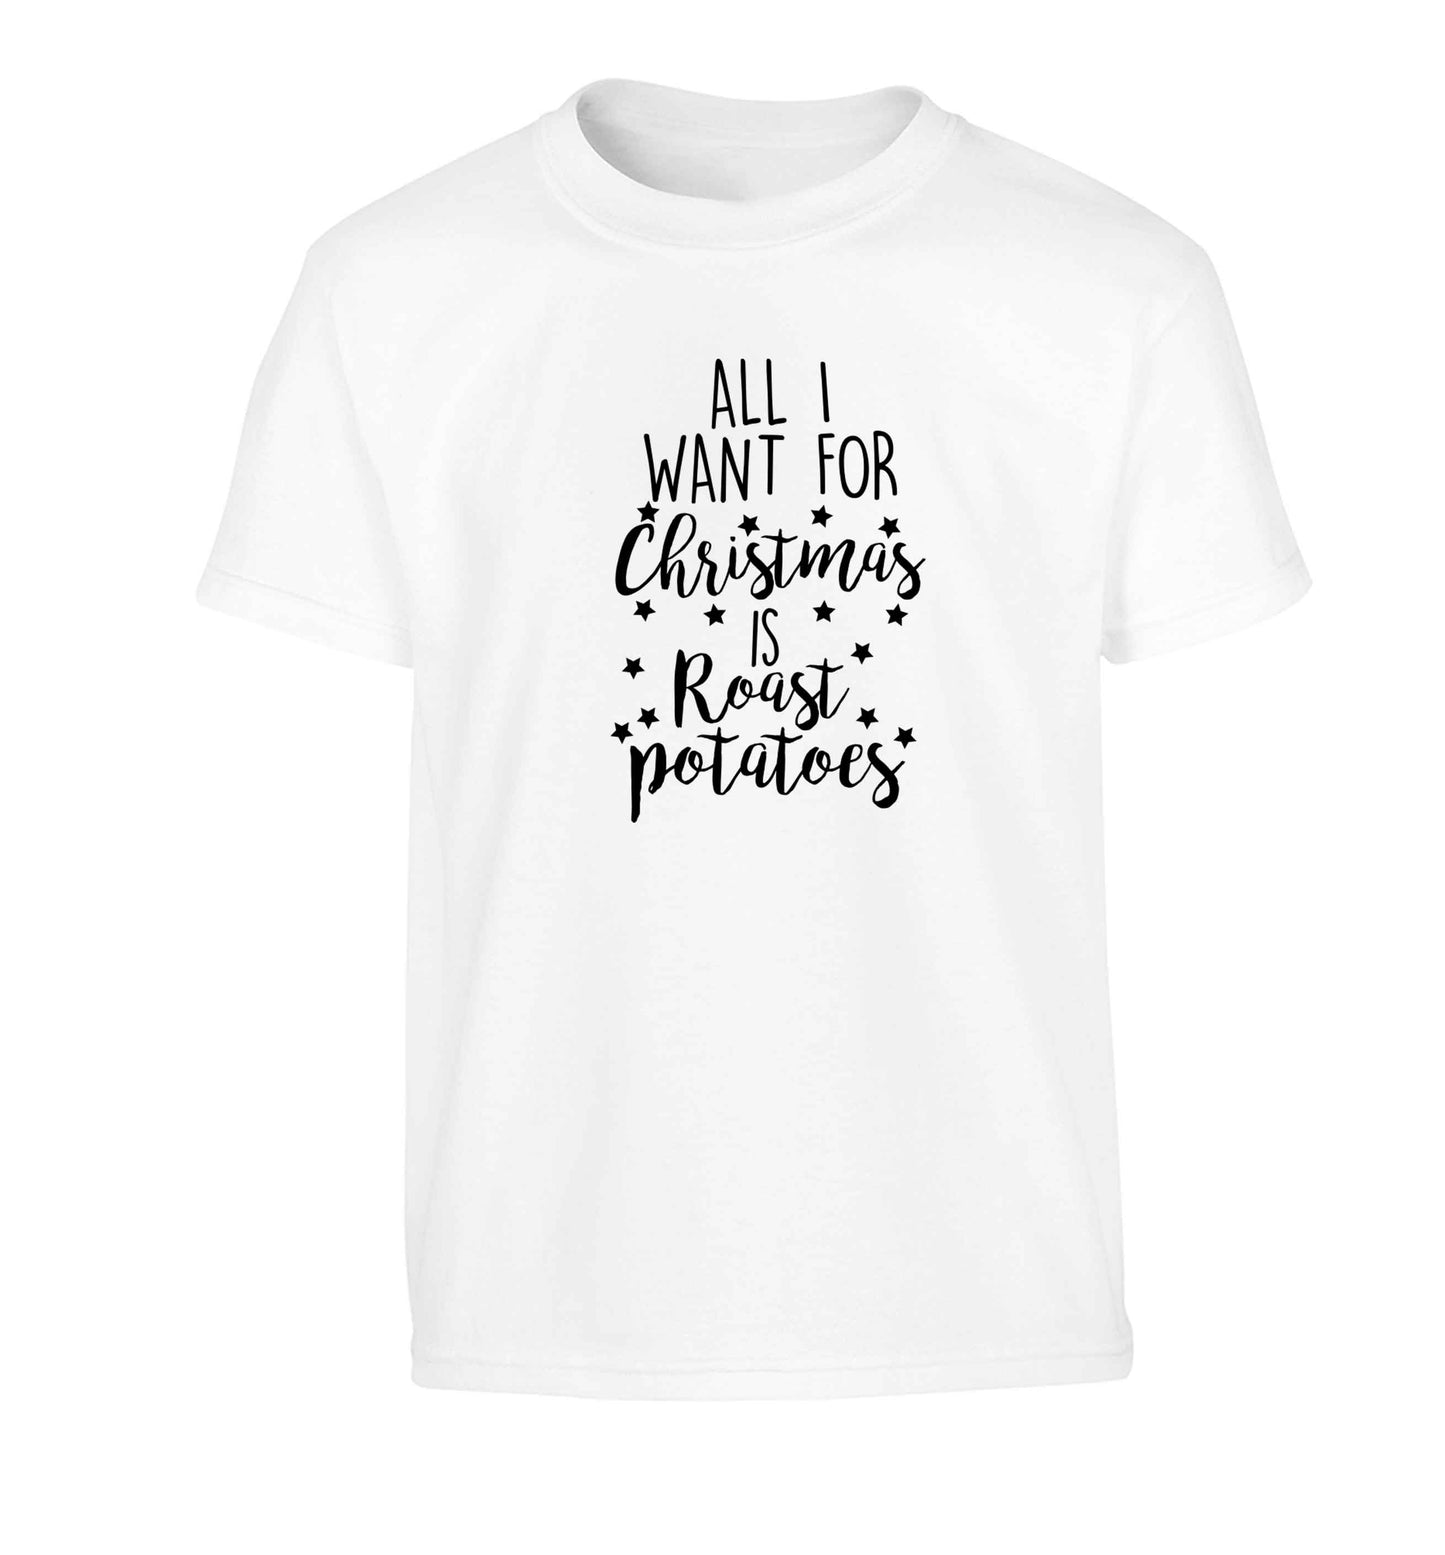 All I want for Christmas is roast potatoes Children's white Tshirt 12-13 Years